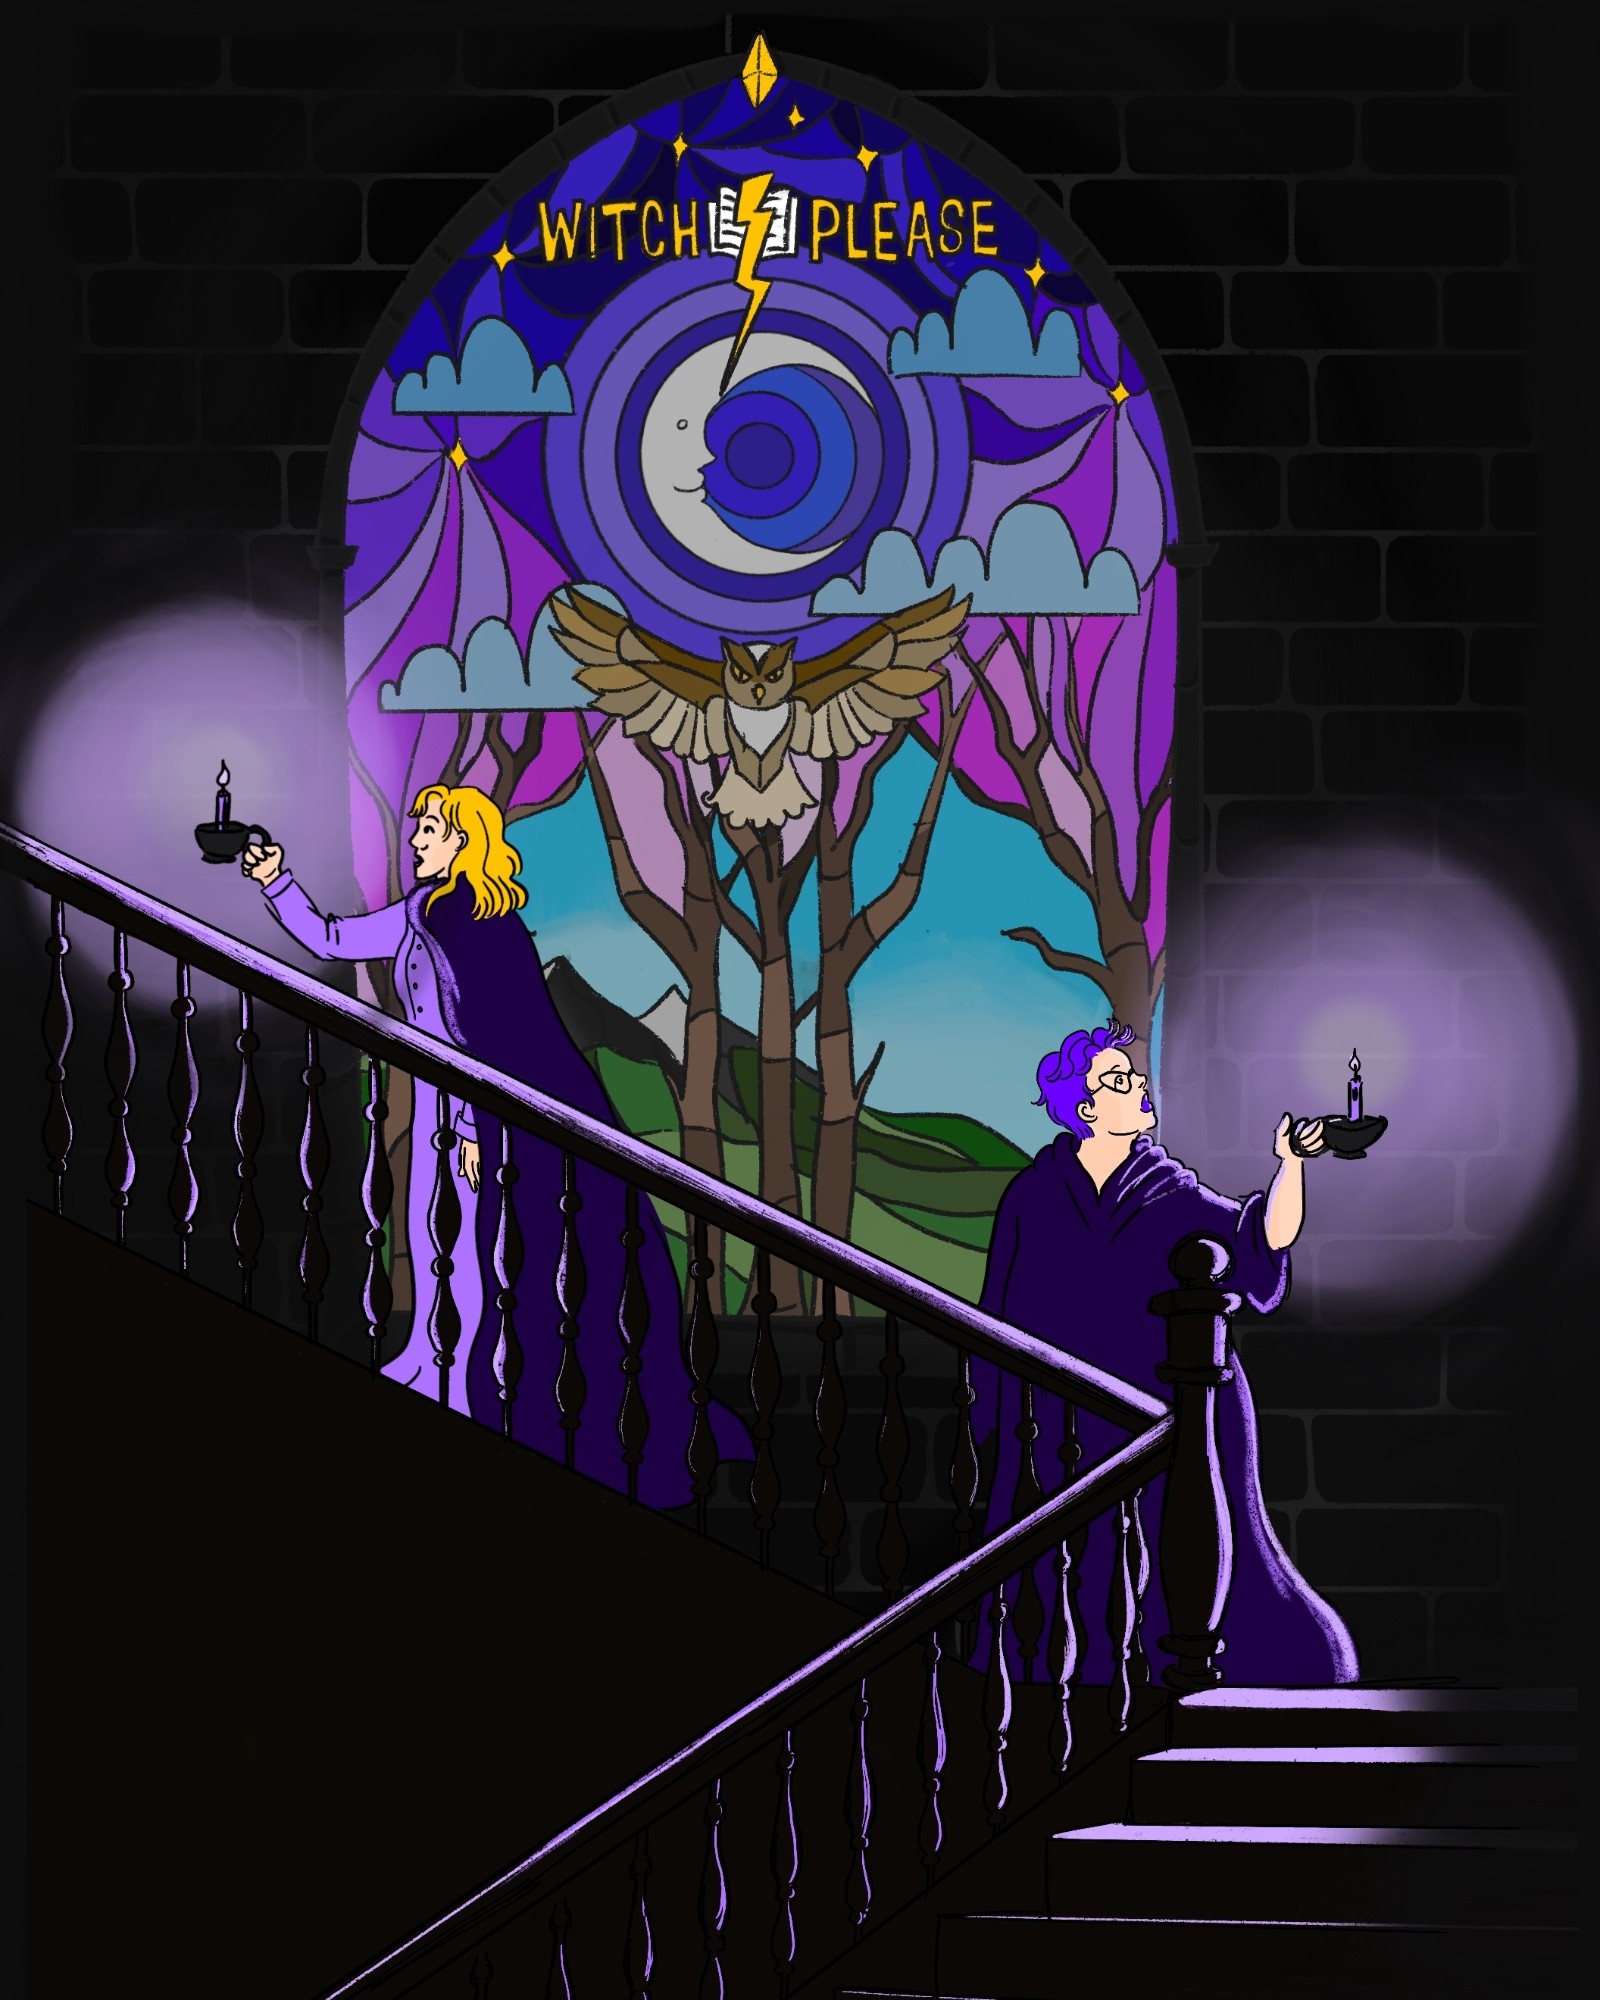 An illustration the hosts of Witch, Please, Marcelle Kosman and Hannah McGregor, wearing purple cloaks, holding lanterns and standing on a stairwell, looking on opposite directions. Behind them is an arched window with an illustration of a trees, mountains, the sky, blue clouds, and a crescent moon. Above it is a "Witch Please" banner in yellow with a book and a lighting bolt running through it. Under the moon, at the center is a brown owl with its wings spread out. 